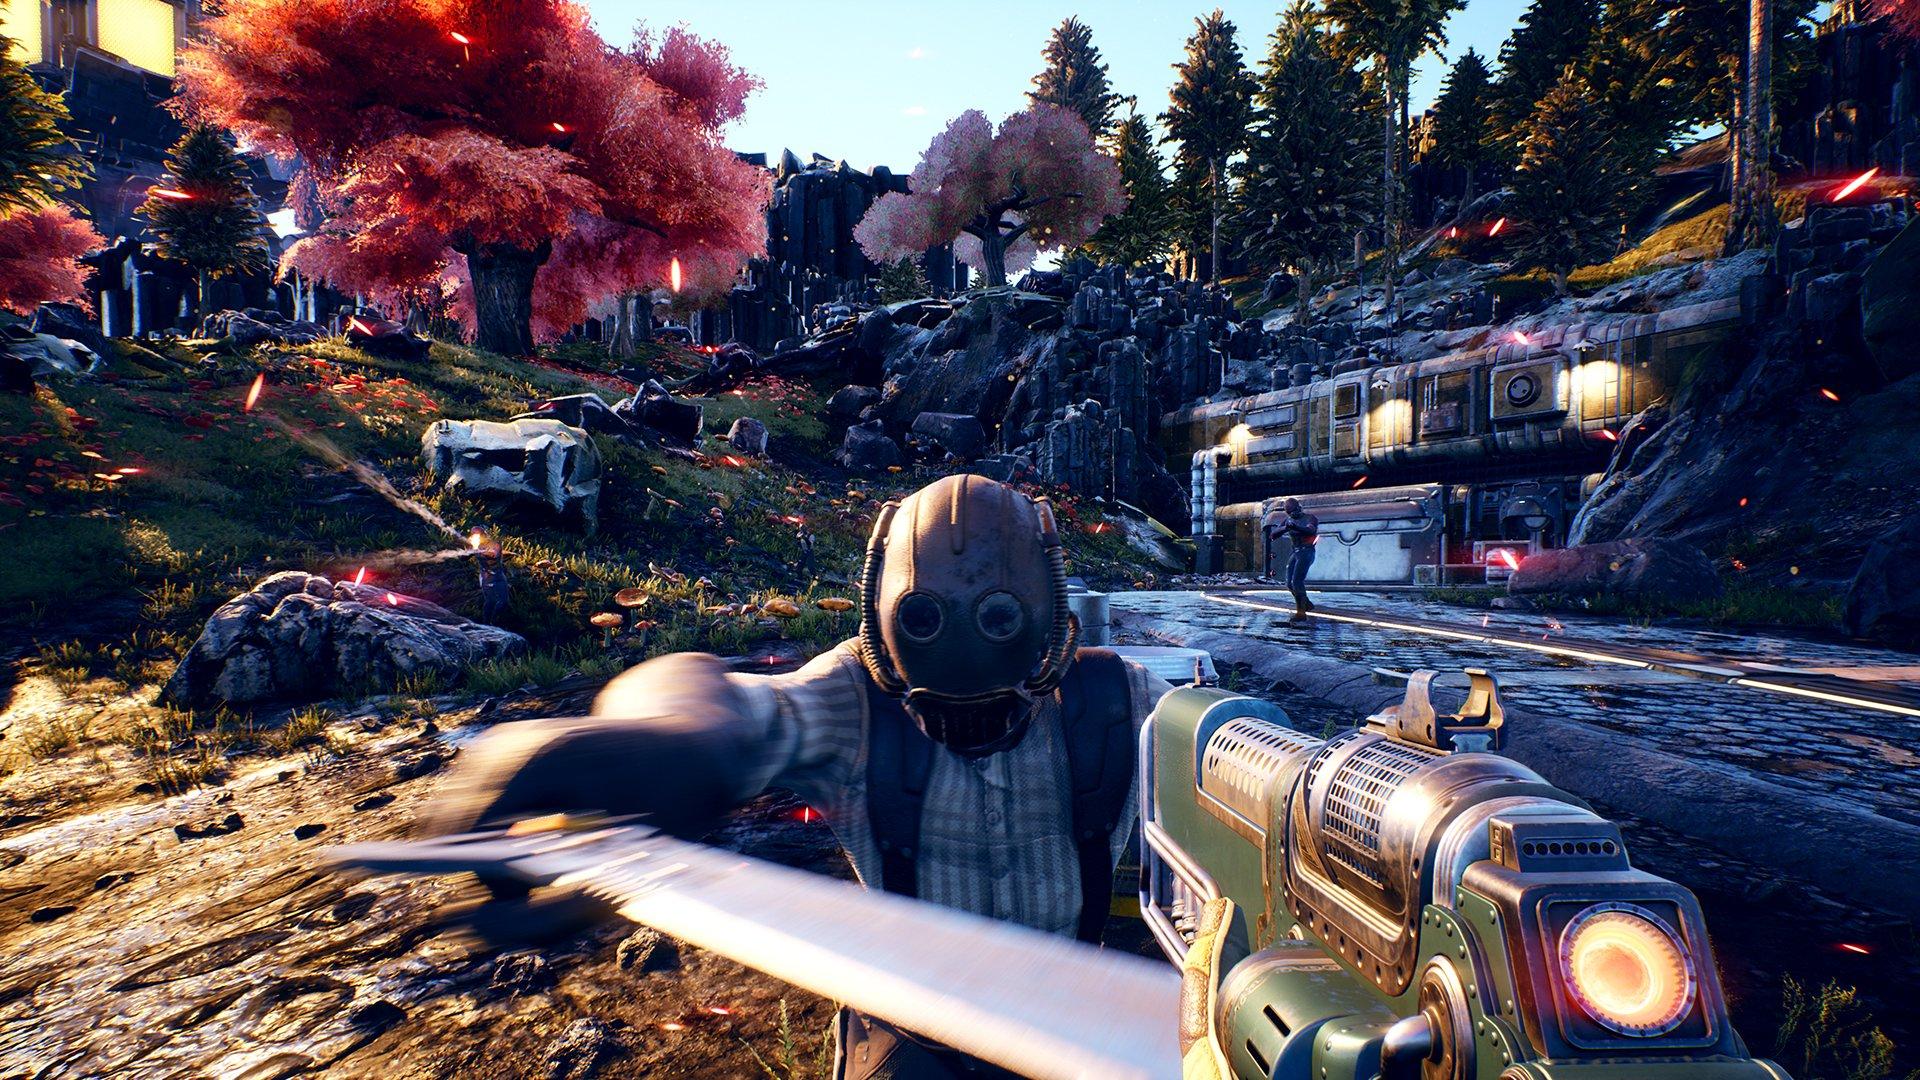 outer worlds price xbox